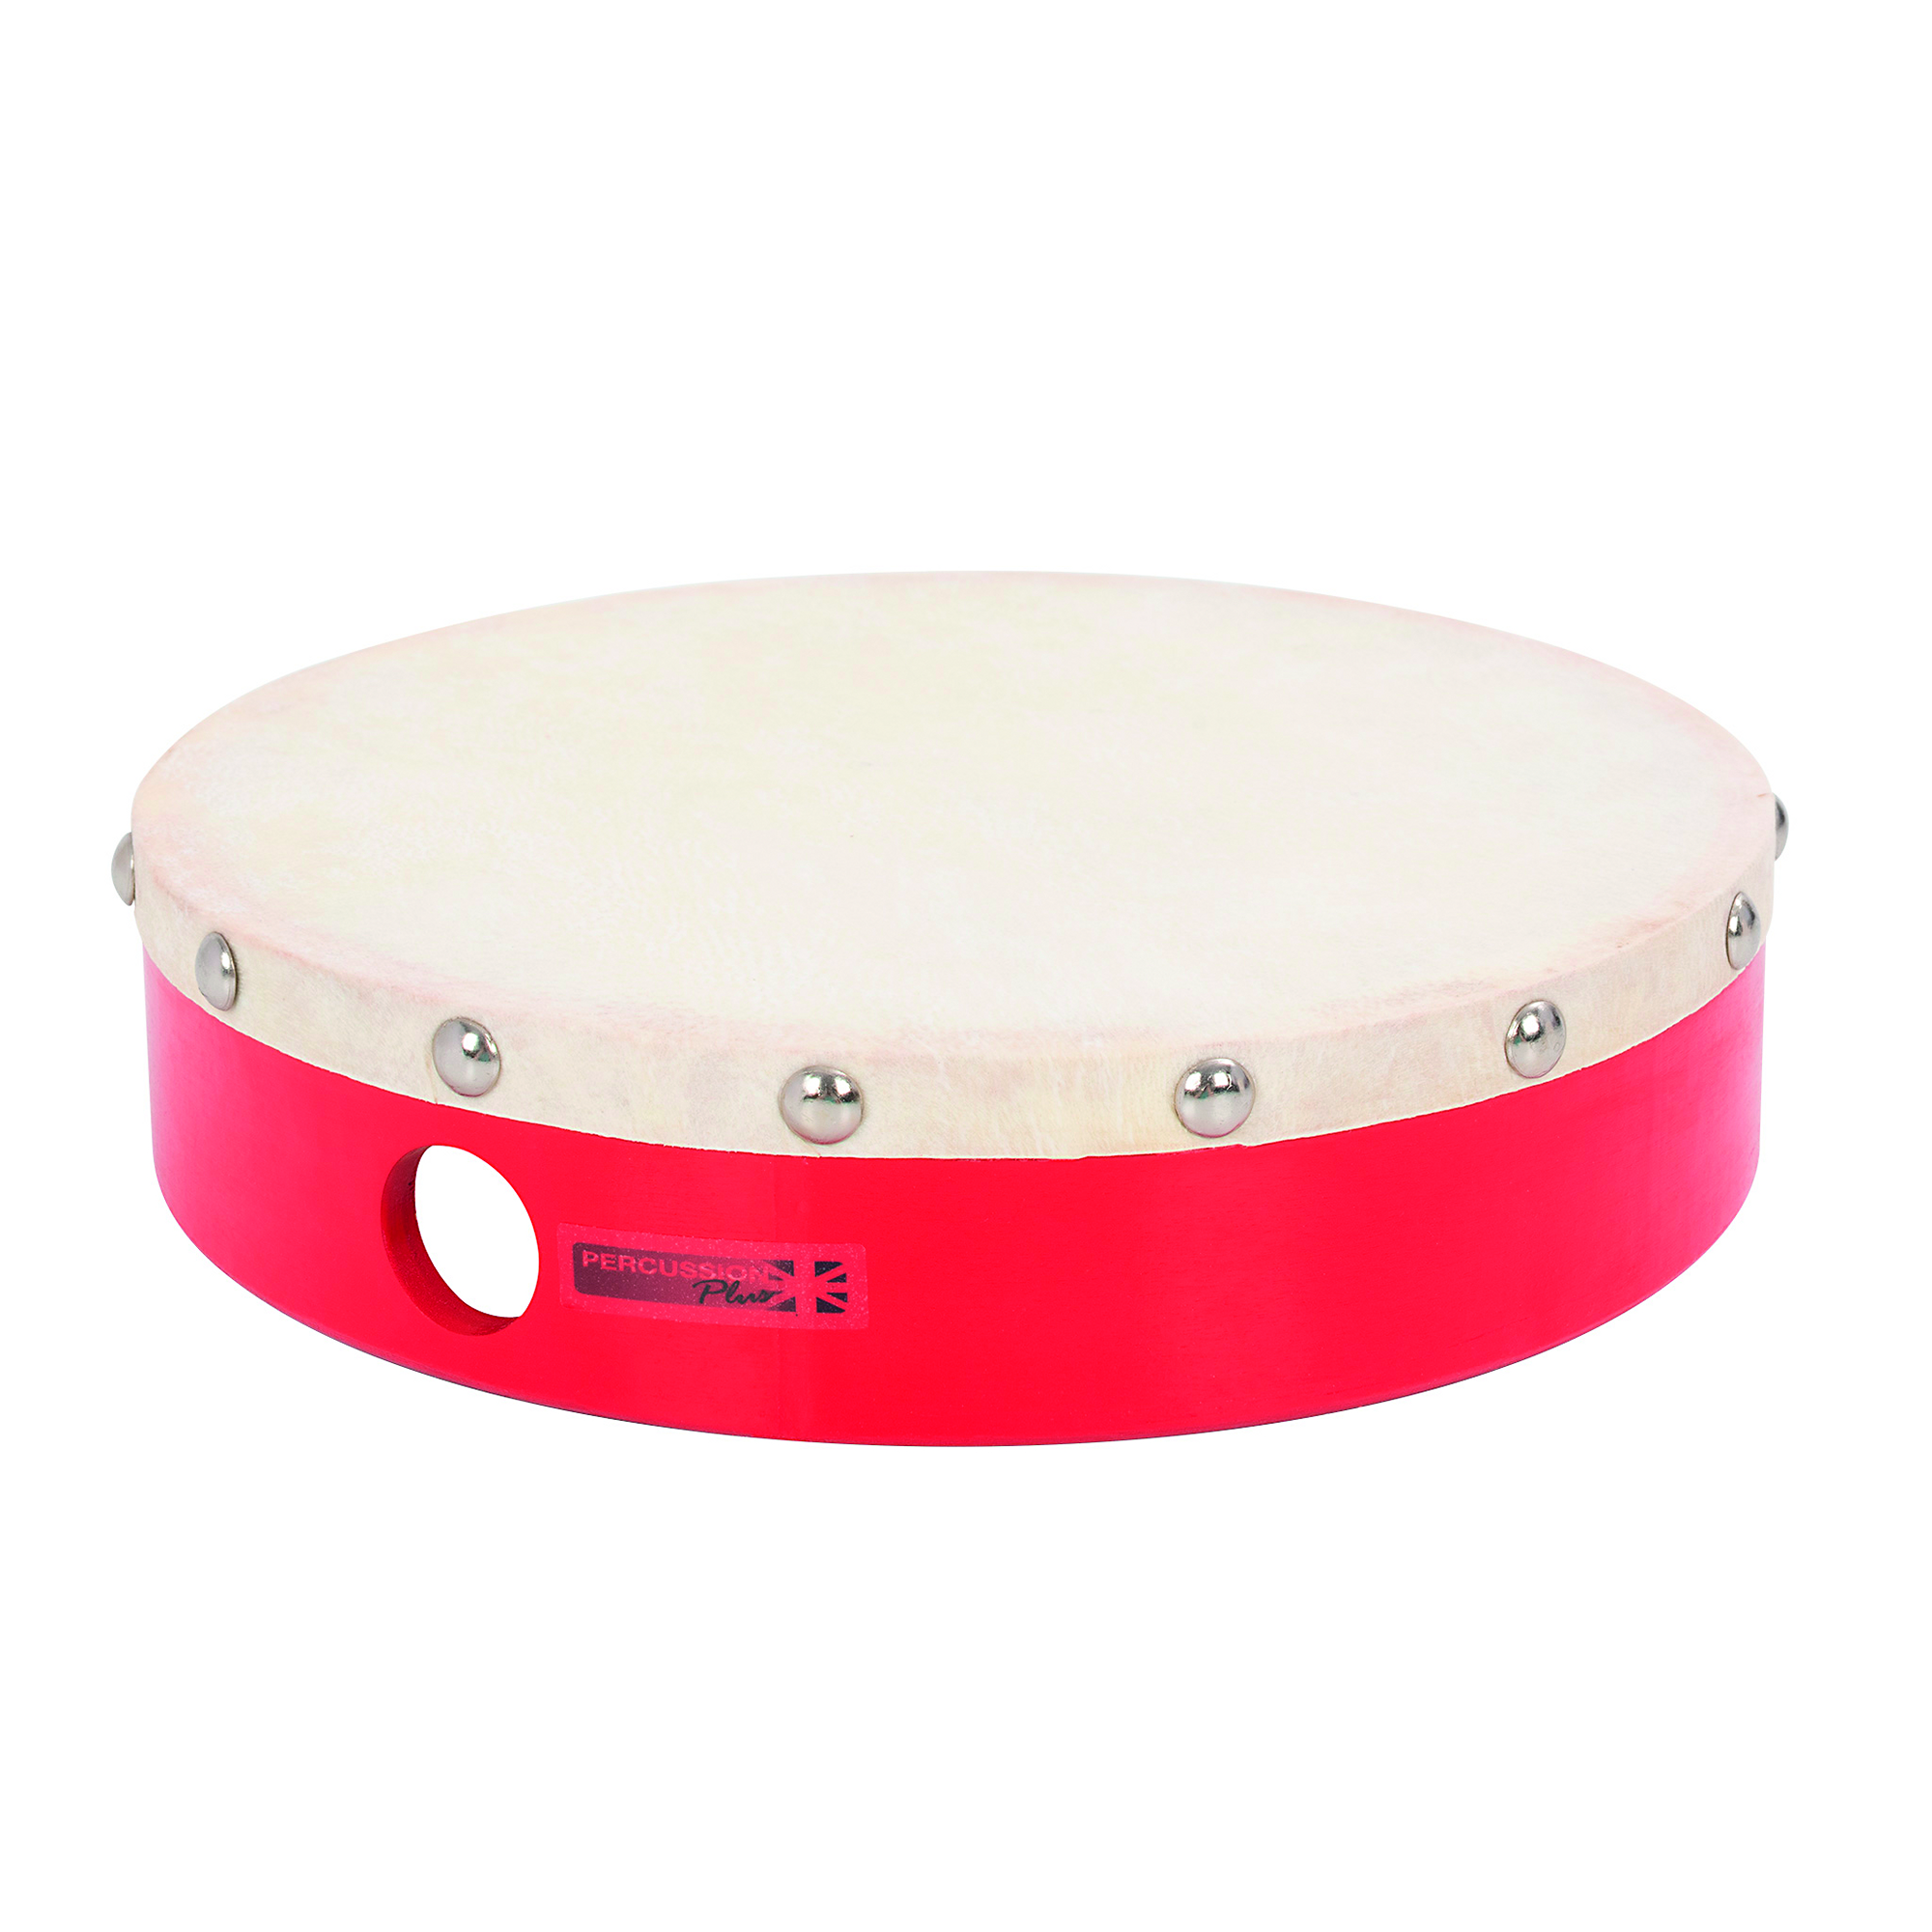 Percussion Plus Tambour Wood Shell 8